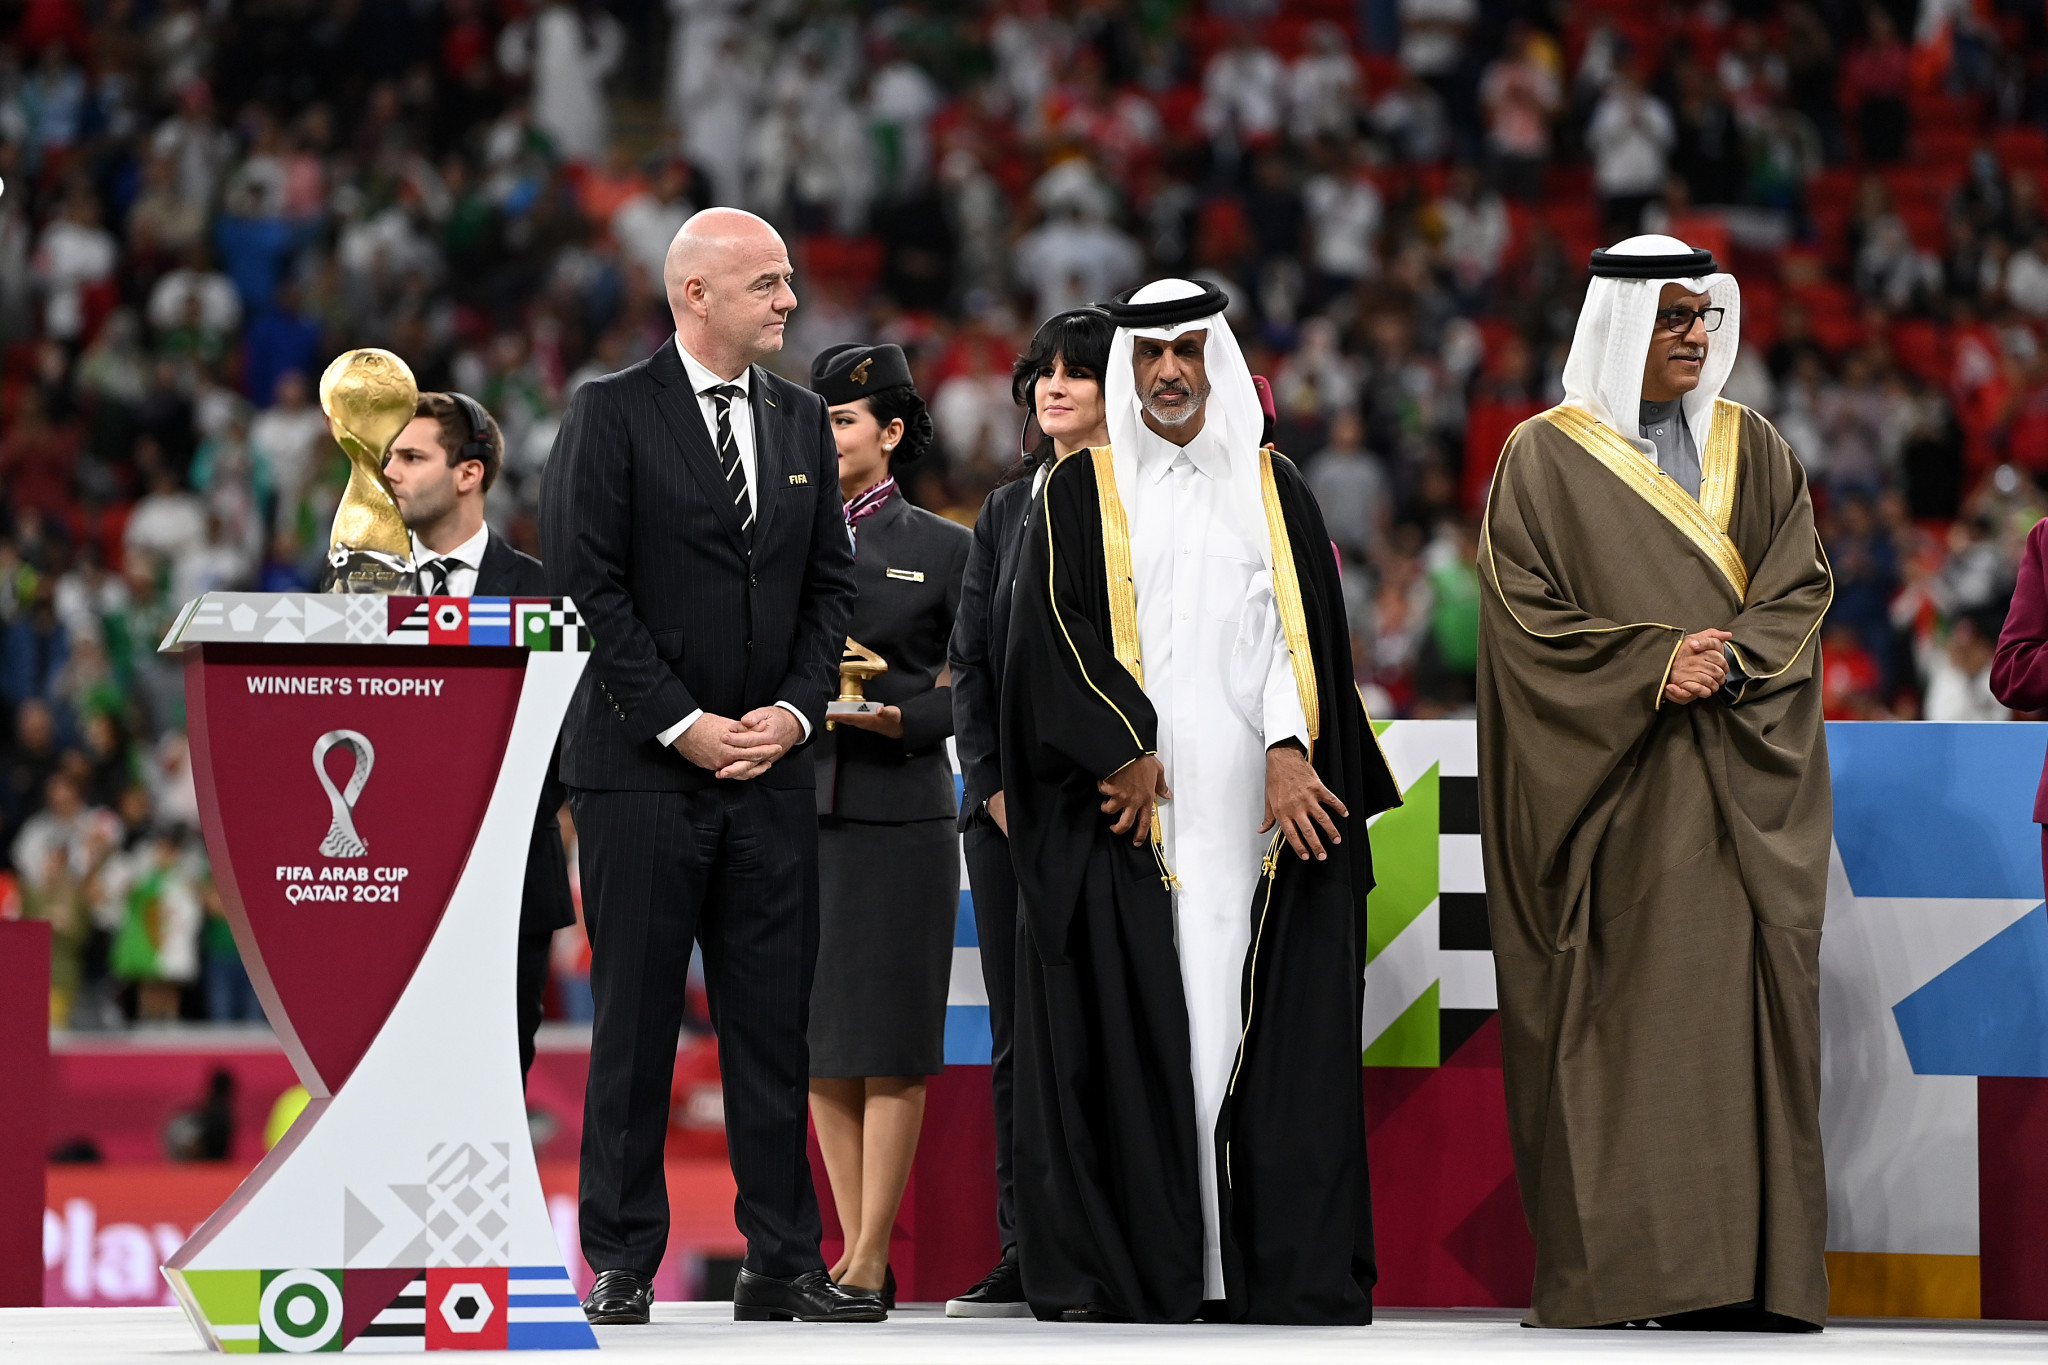 FIFA's financial statements reveal that Qatar’s contribution to the tournament was $77.5 million ©Getty Images